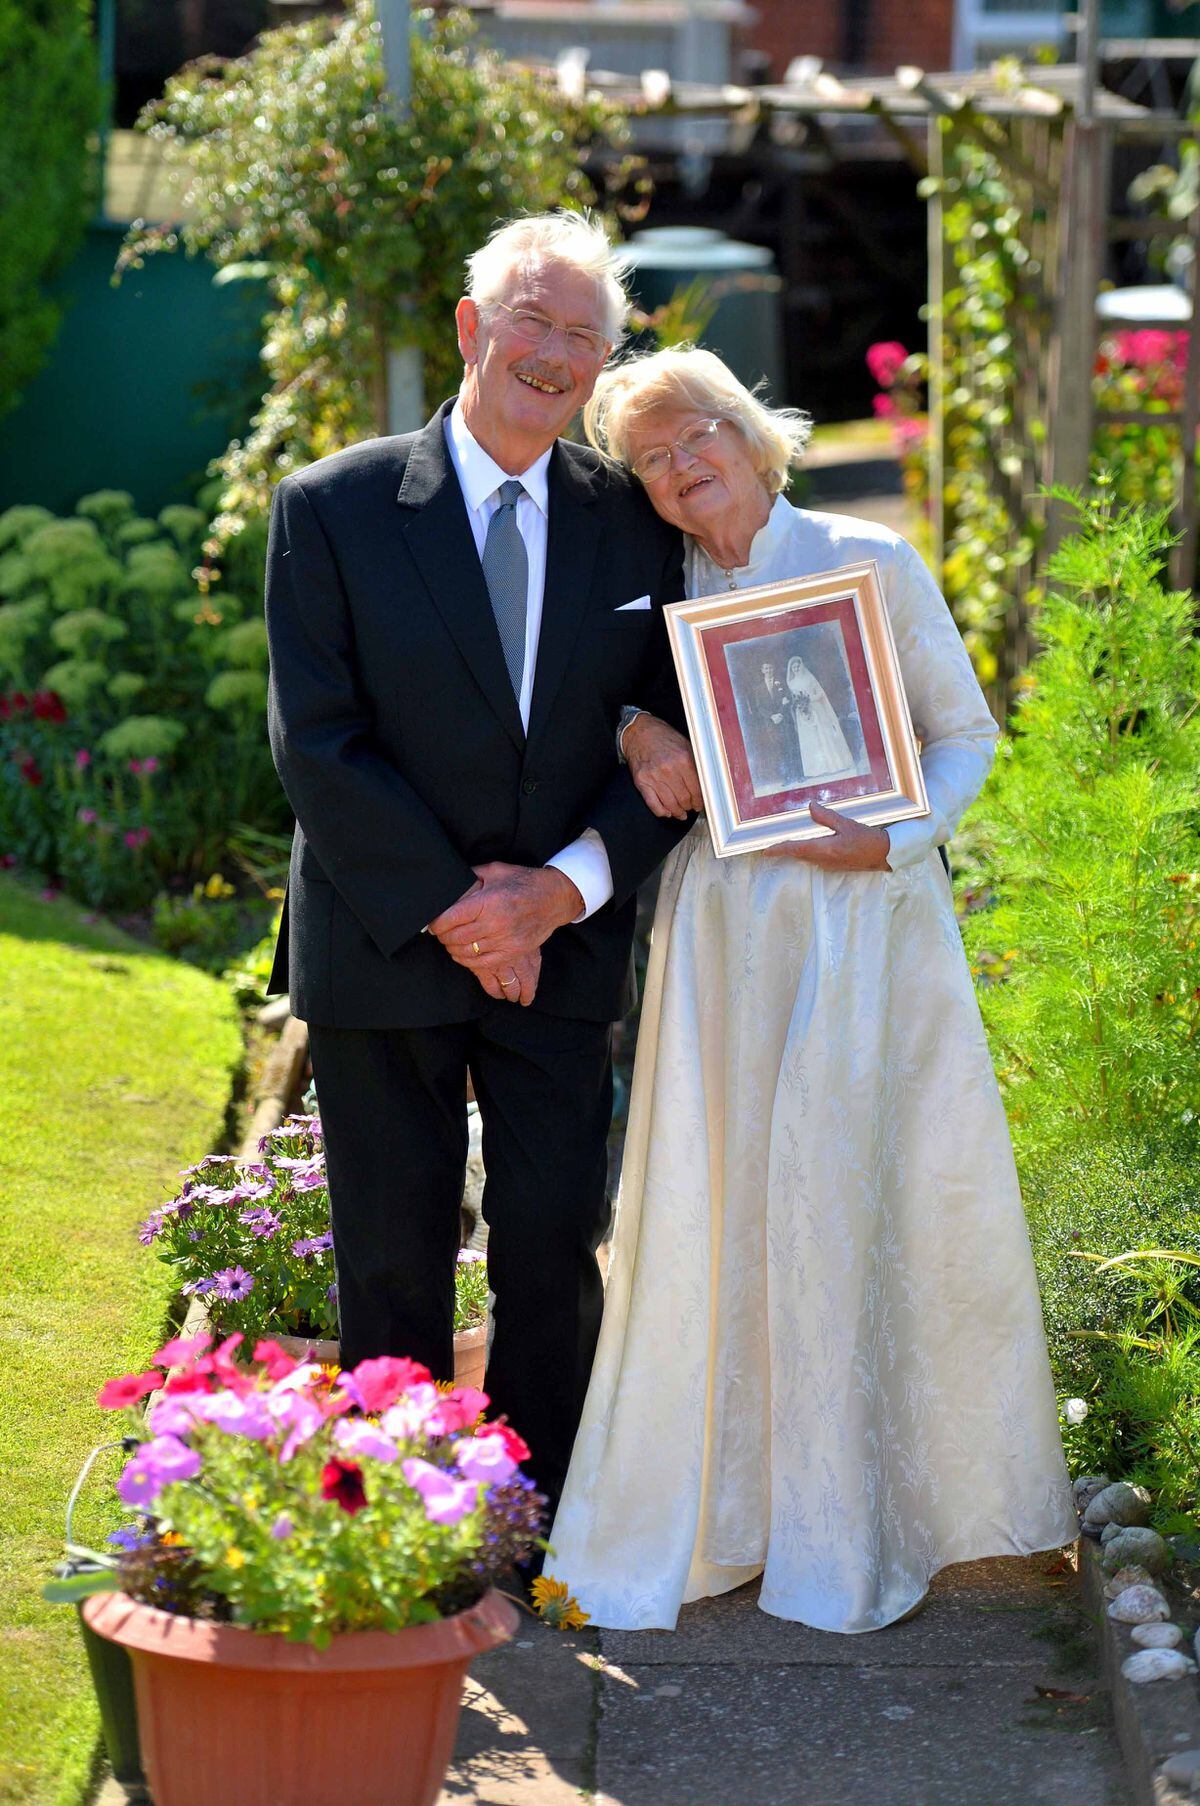 Eric and Renee celebrated their 65th wedding anniversary earlier this week